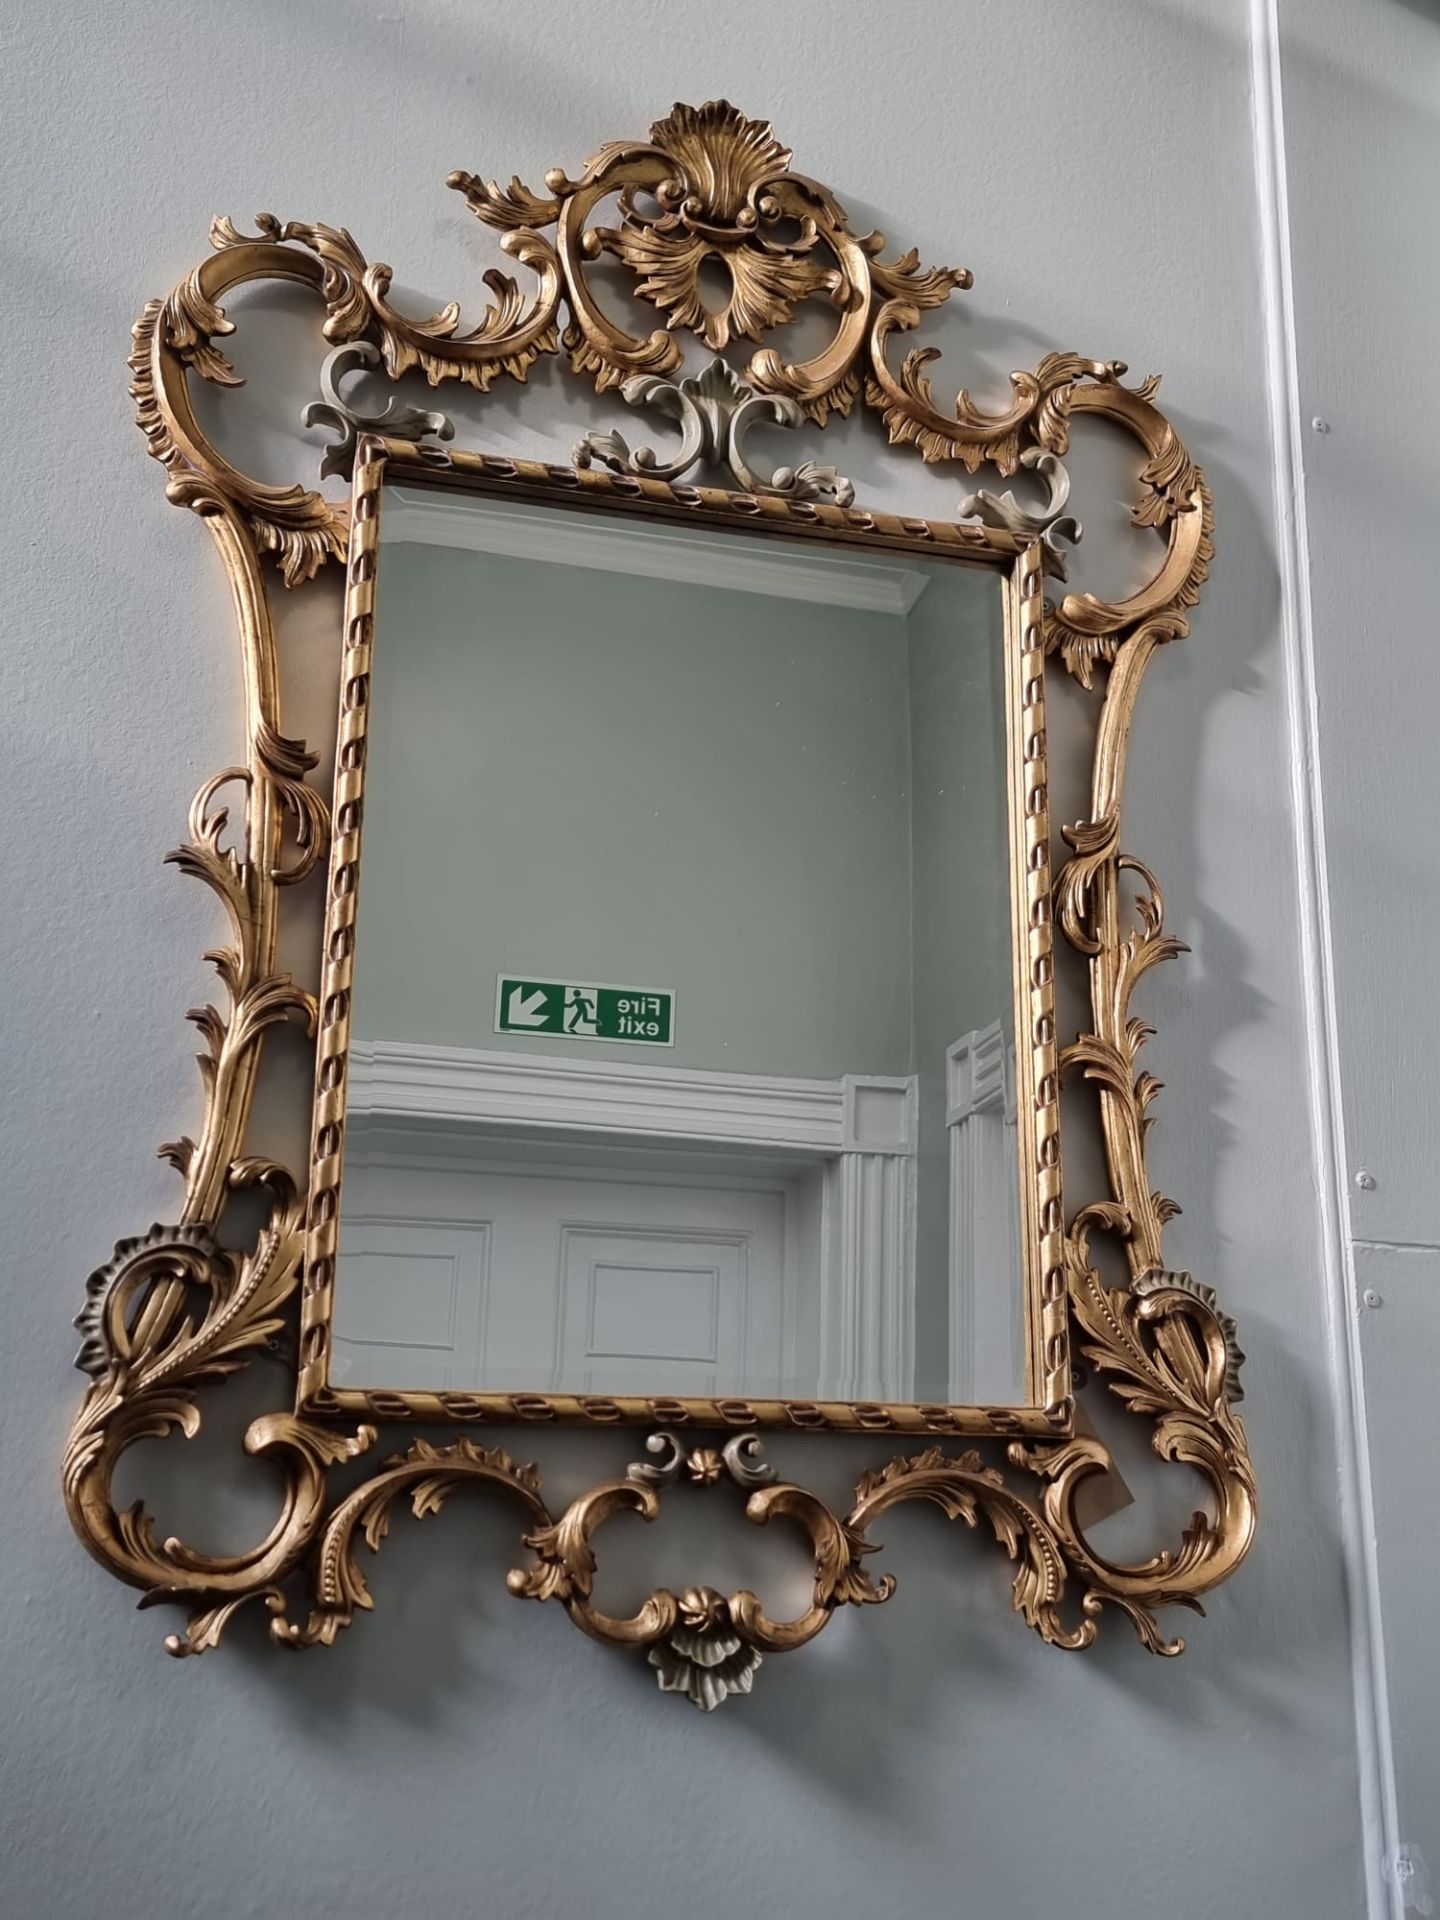 Monumental Louis XV Style Gilt Pier Mirror  Carved And Gilt Overmantle Or Pier Mirror. Original